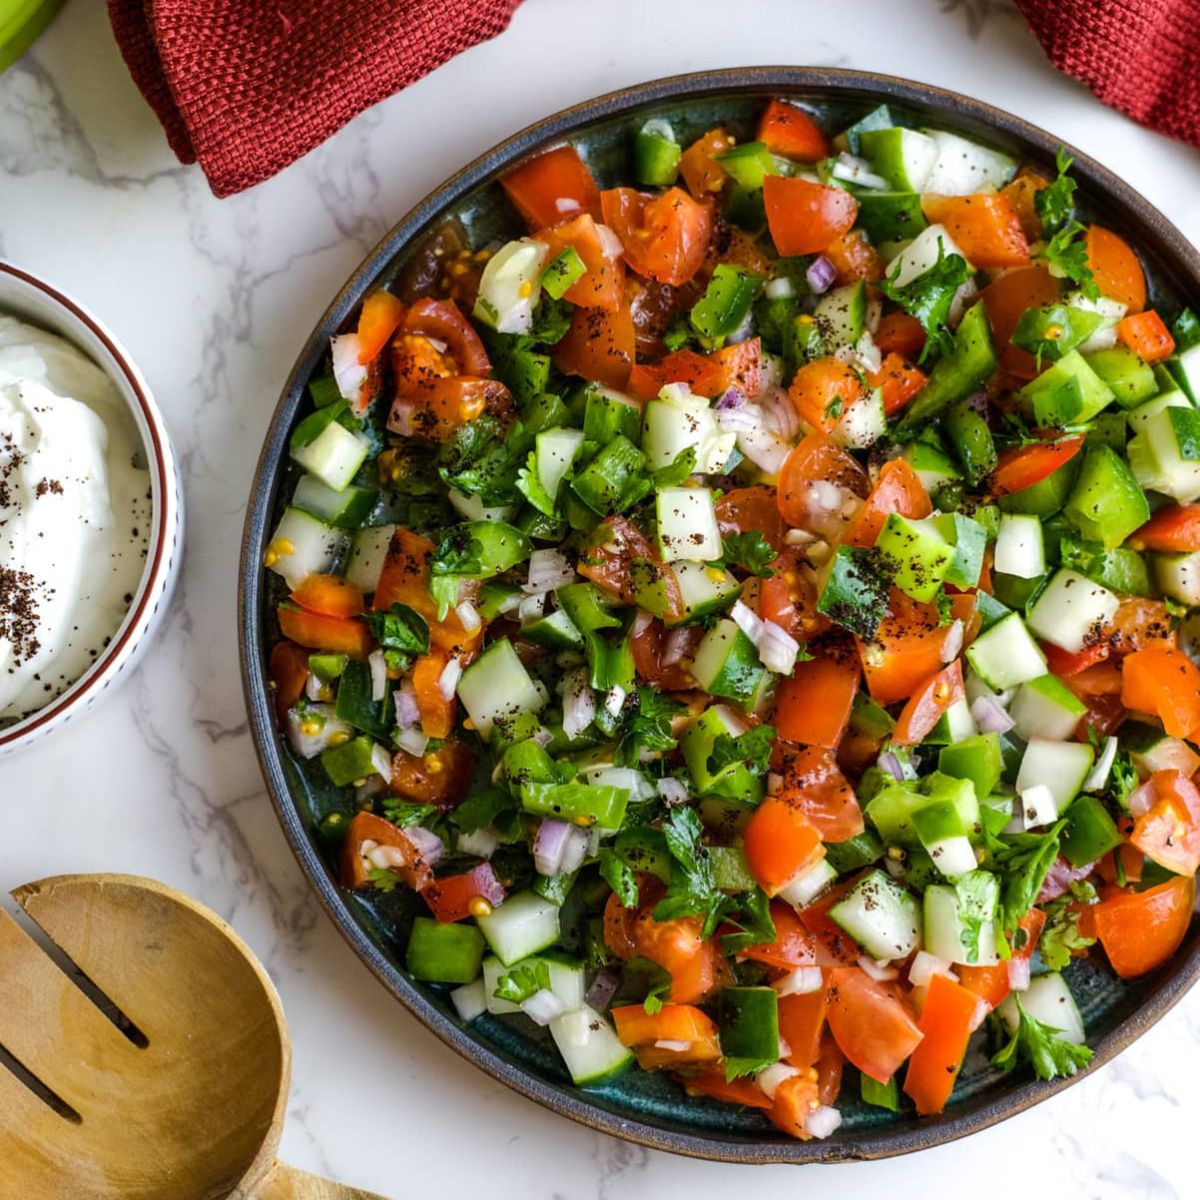 Turkish salad in a serving dish